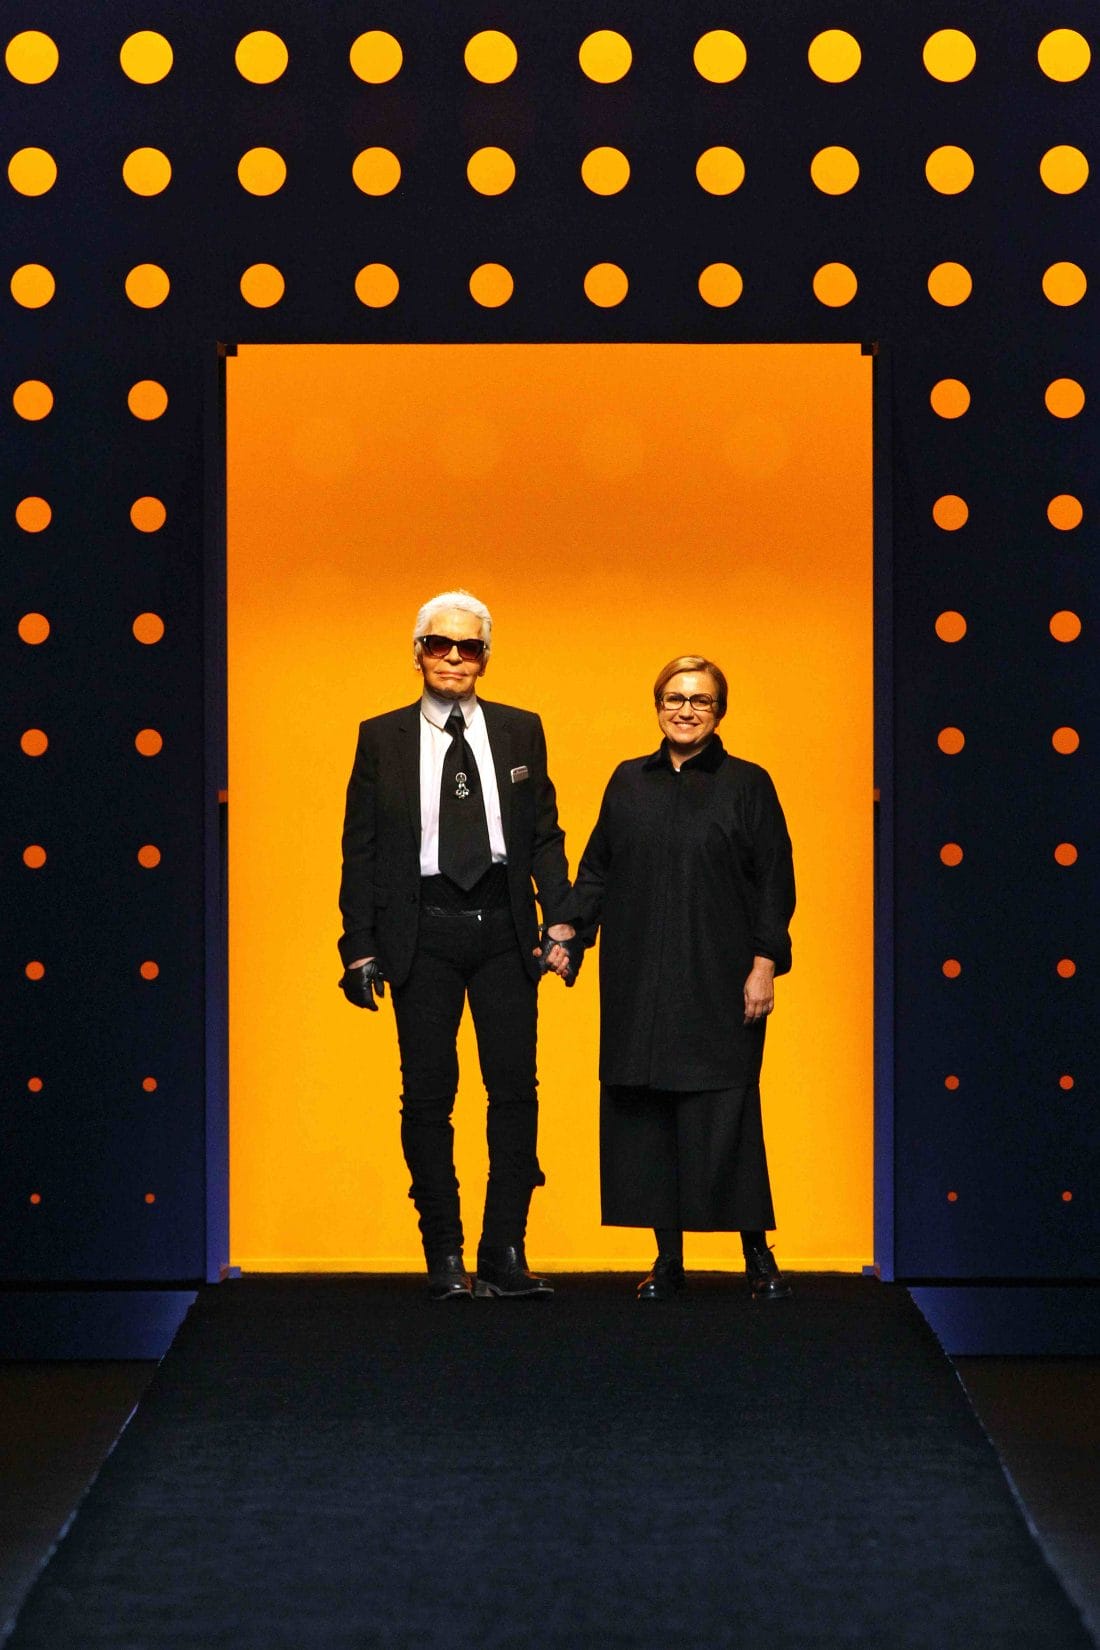 Karl Lagerfeld and Silvia Venturini Fendi, celebrates on this occasion, 90 years of the Maison’s great revolutionary worldwide achievements.